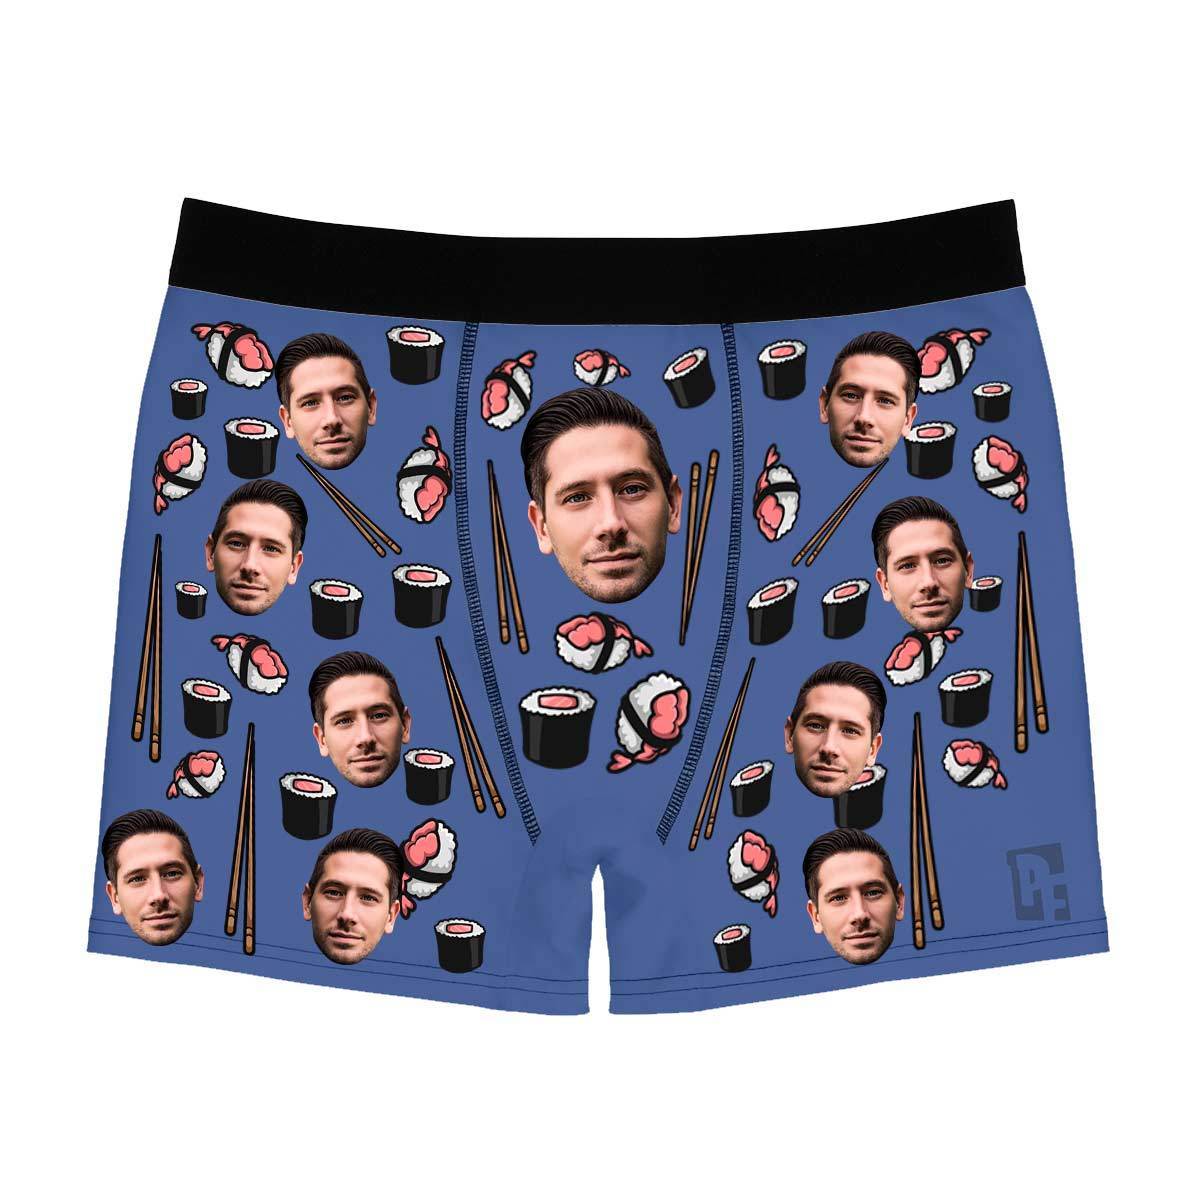 Darkblue Sushi men's boxer briefs personalized with photo printed on them